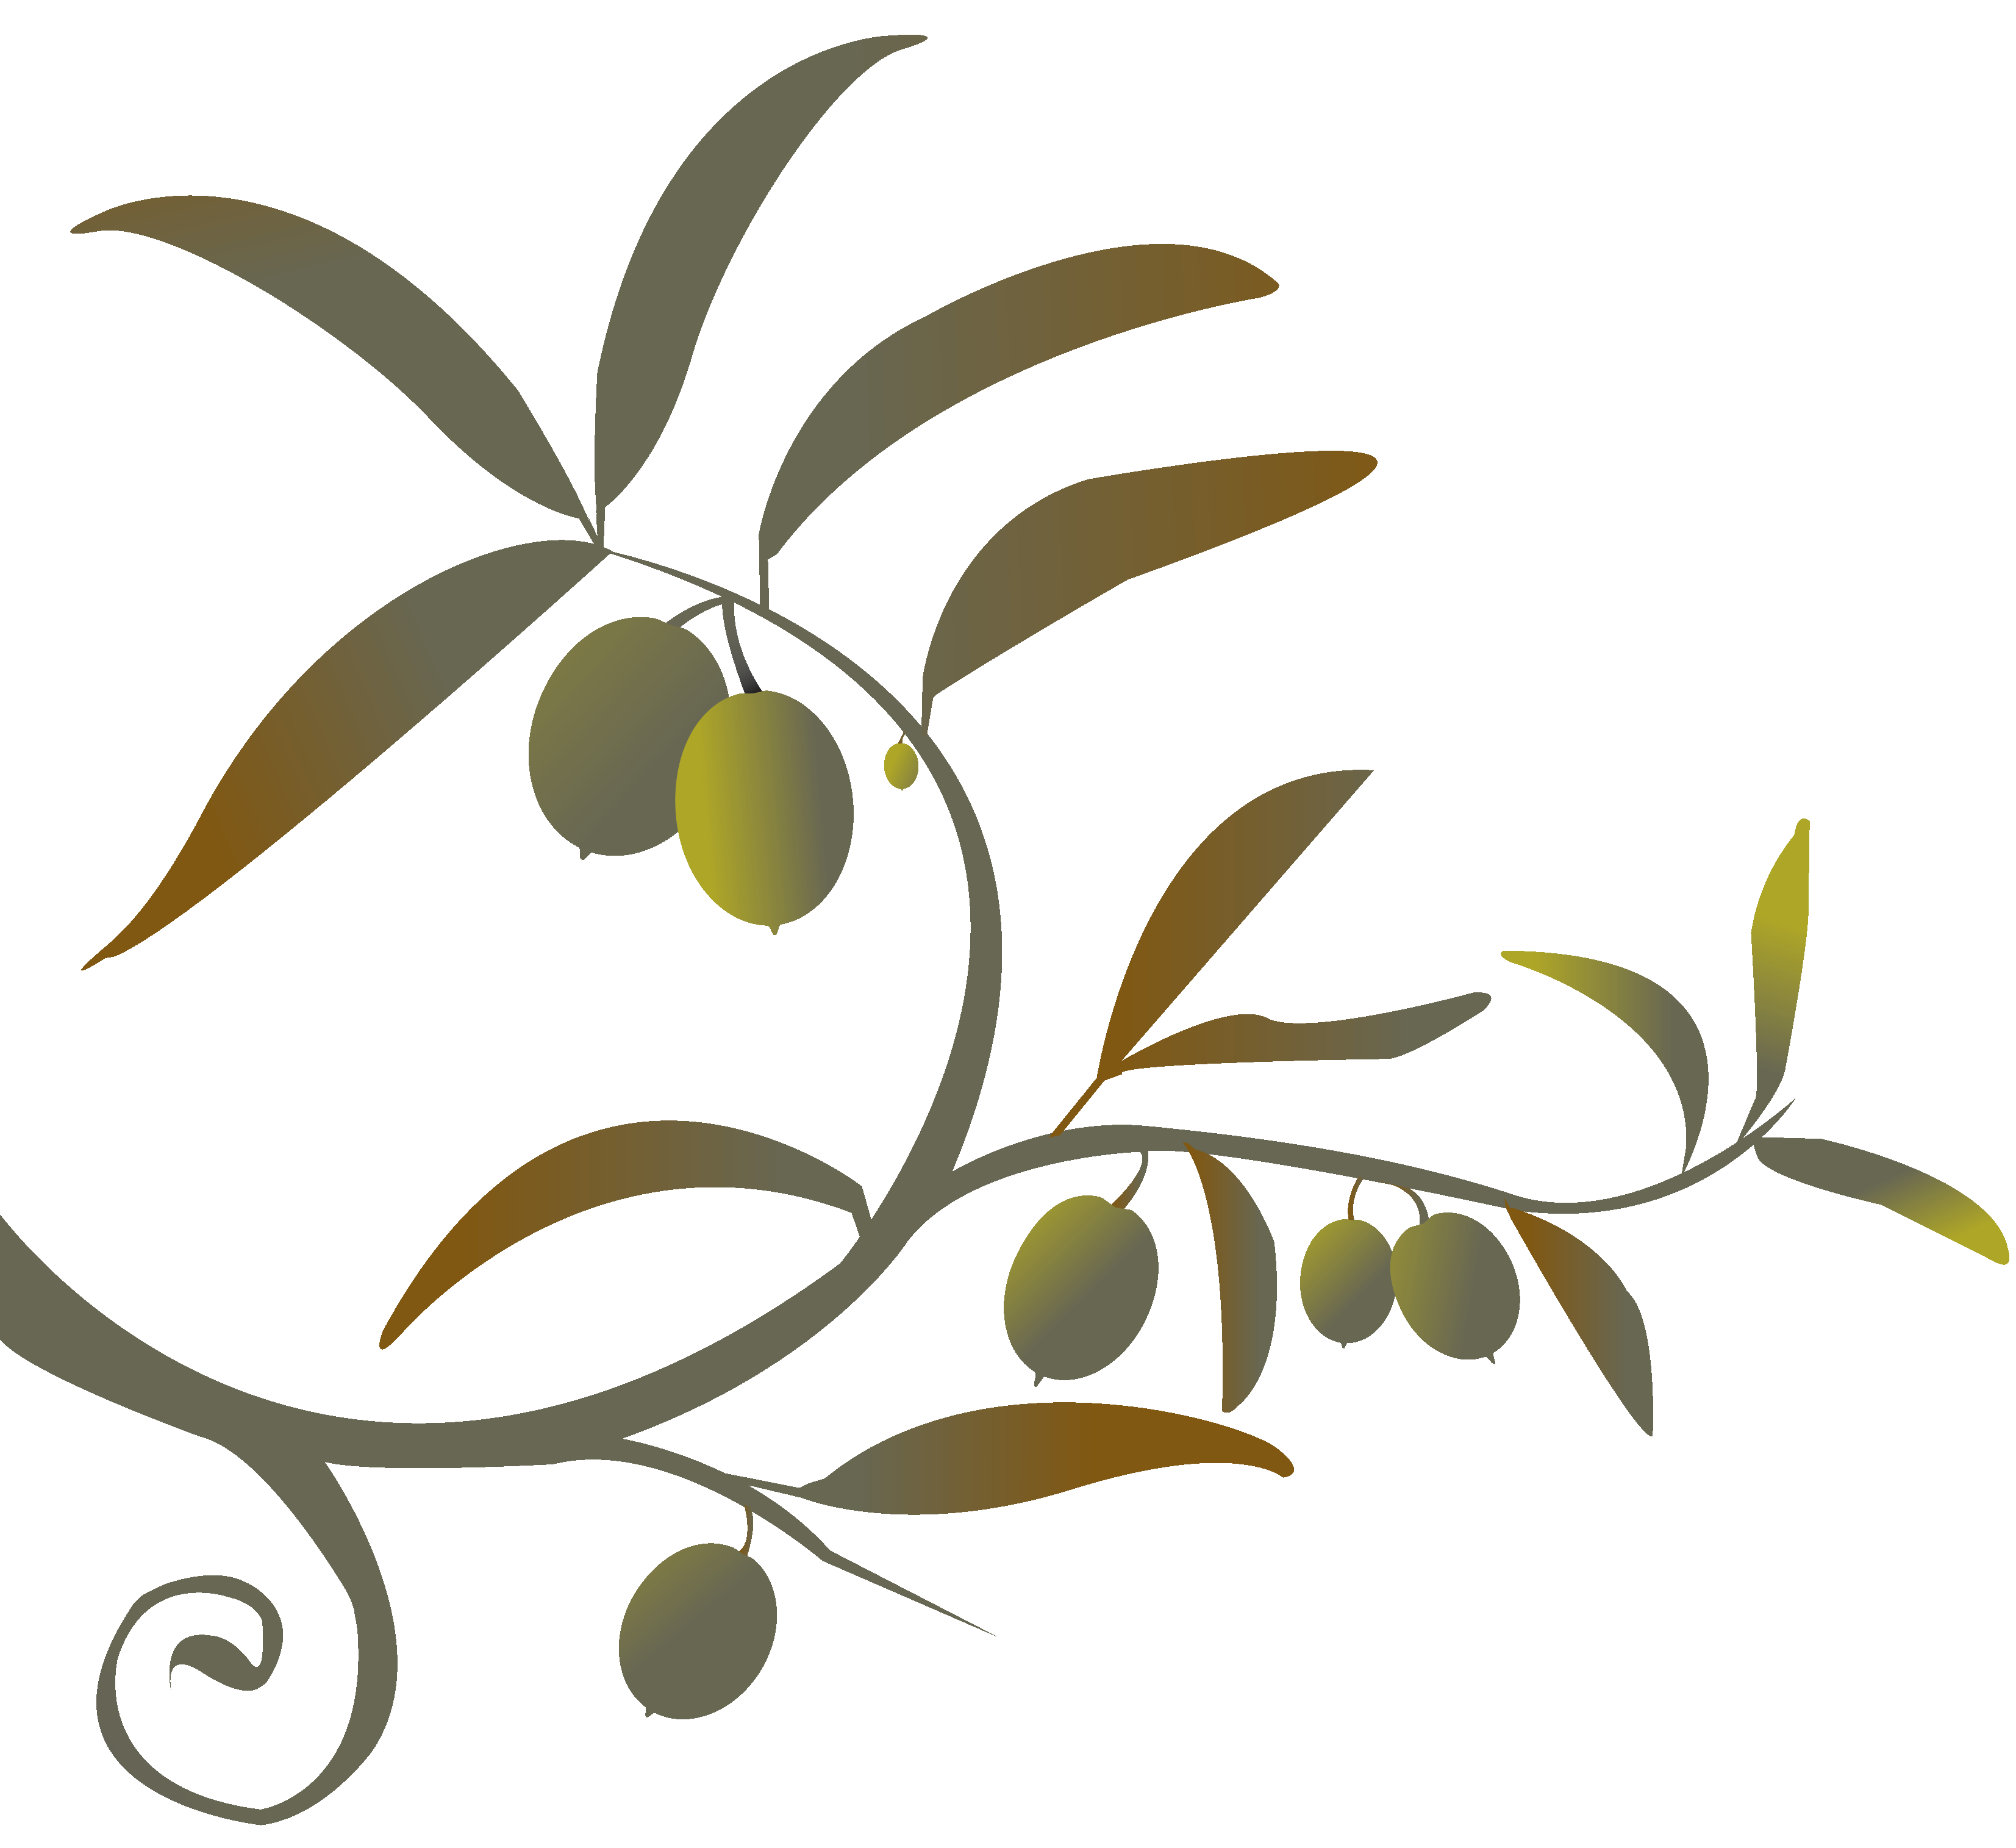 Laurel clipart foliage. Free olive branch download